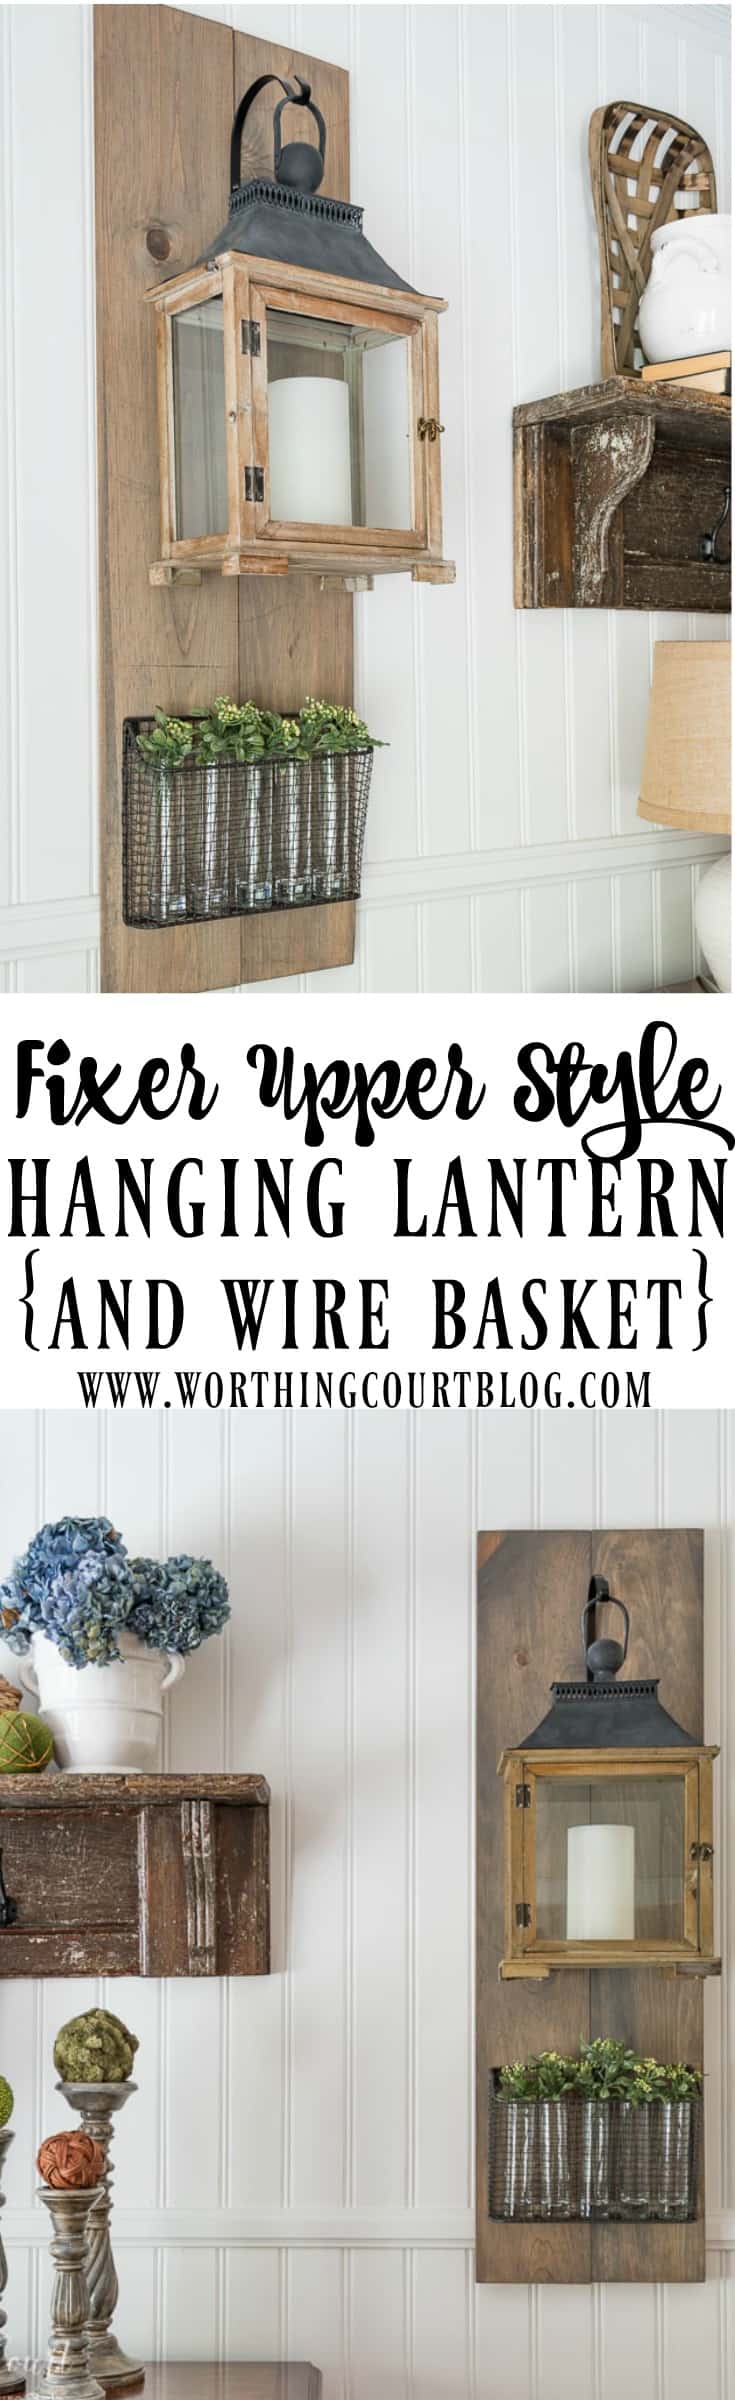 Fixer Upper Style Hanging Lantern And Wire Basket poster.